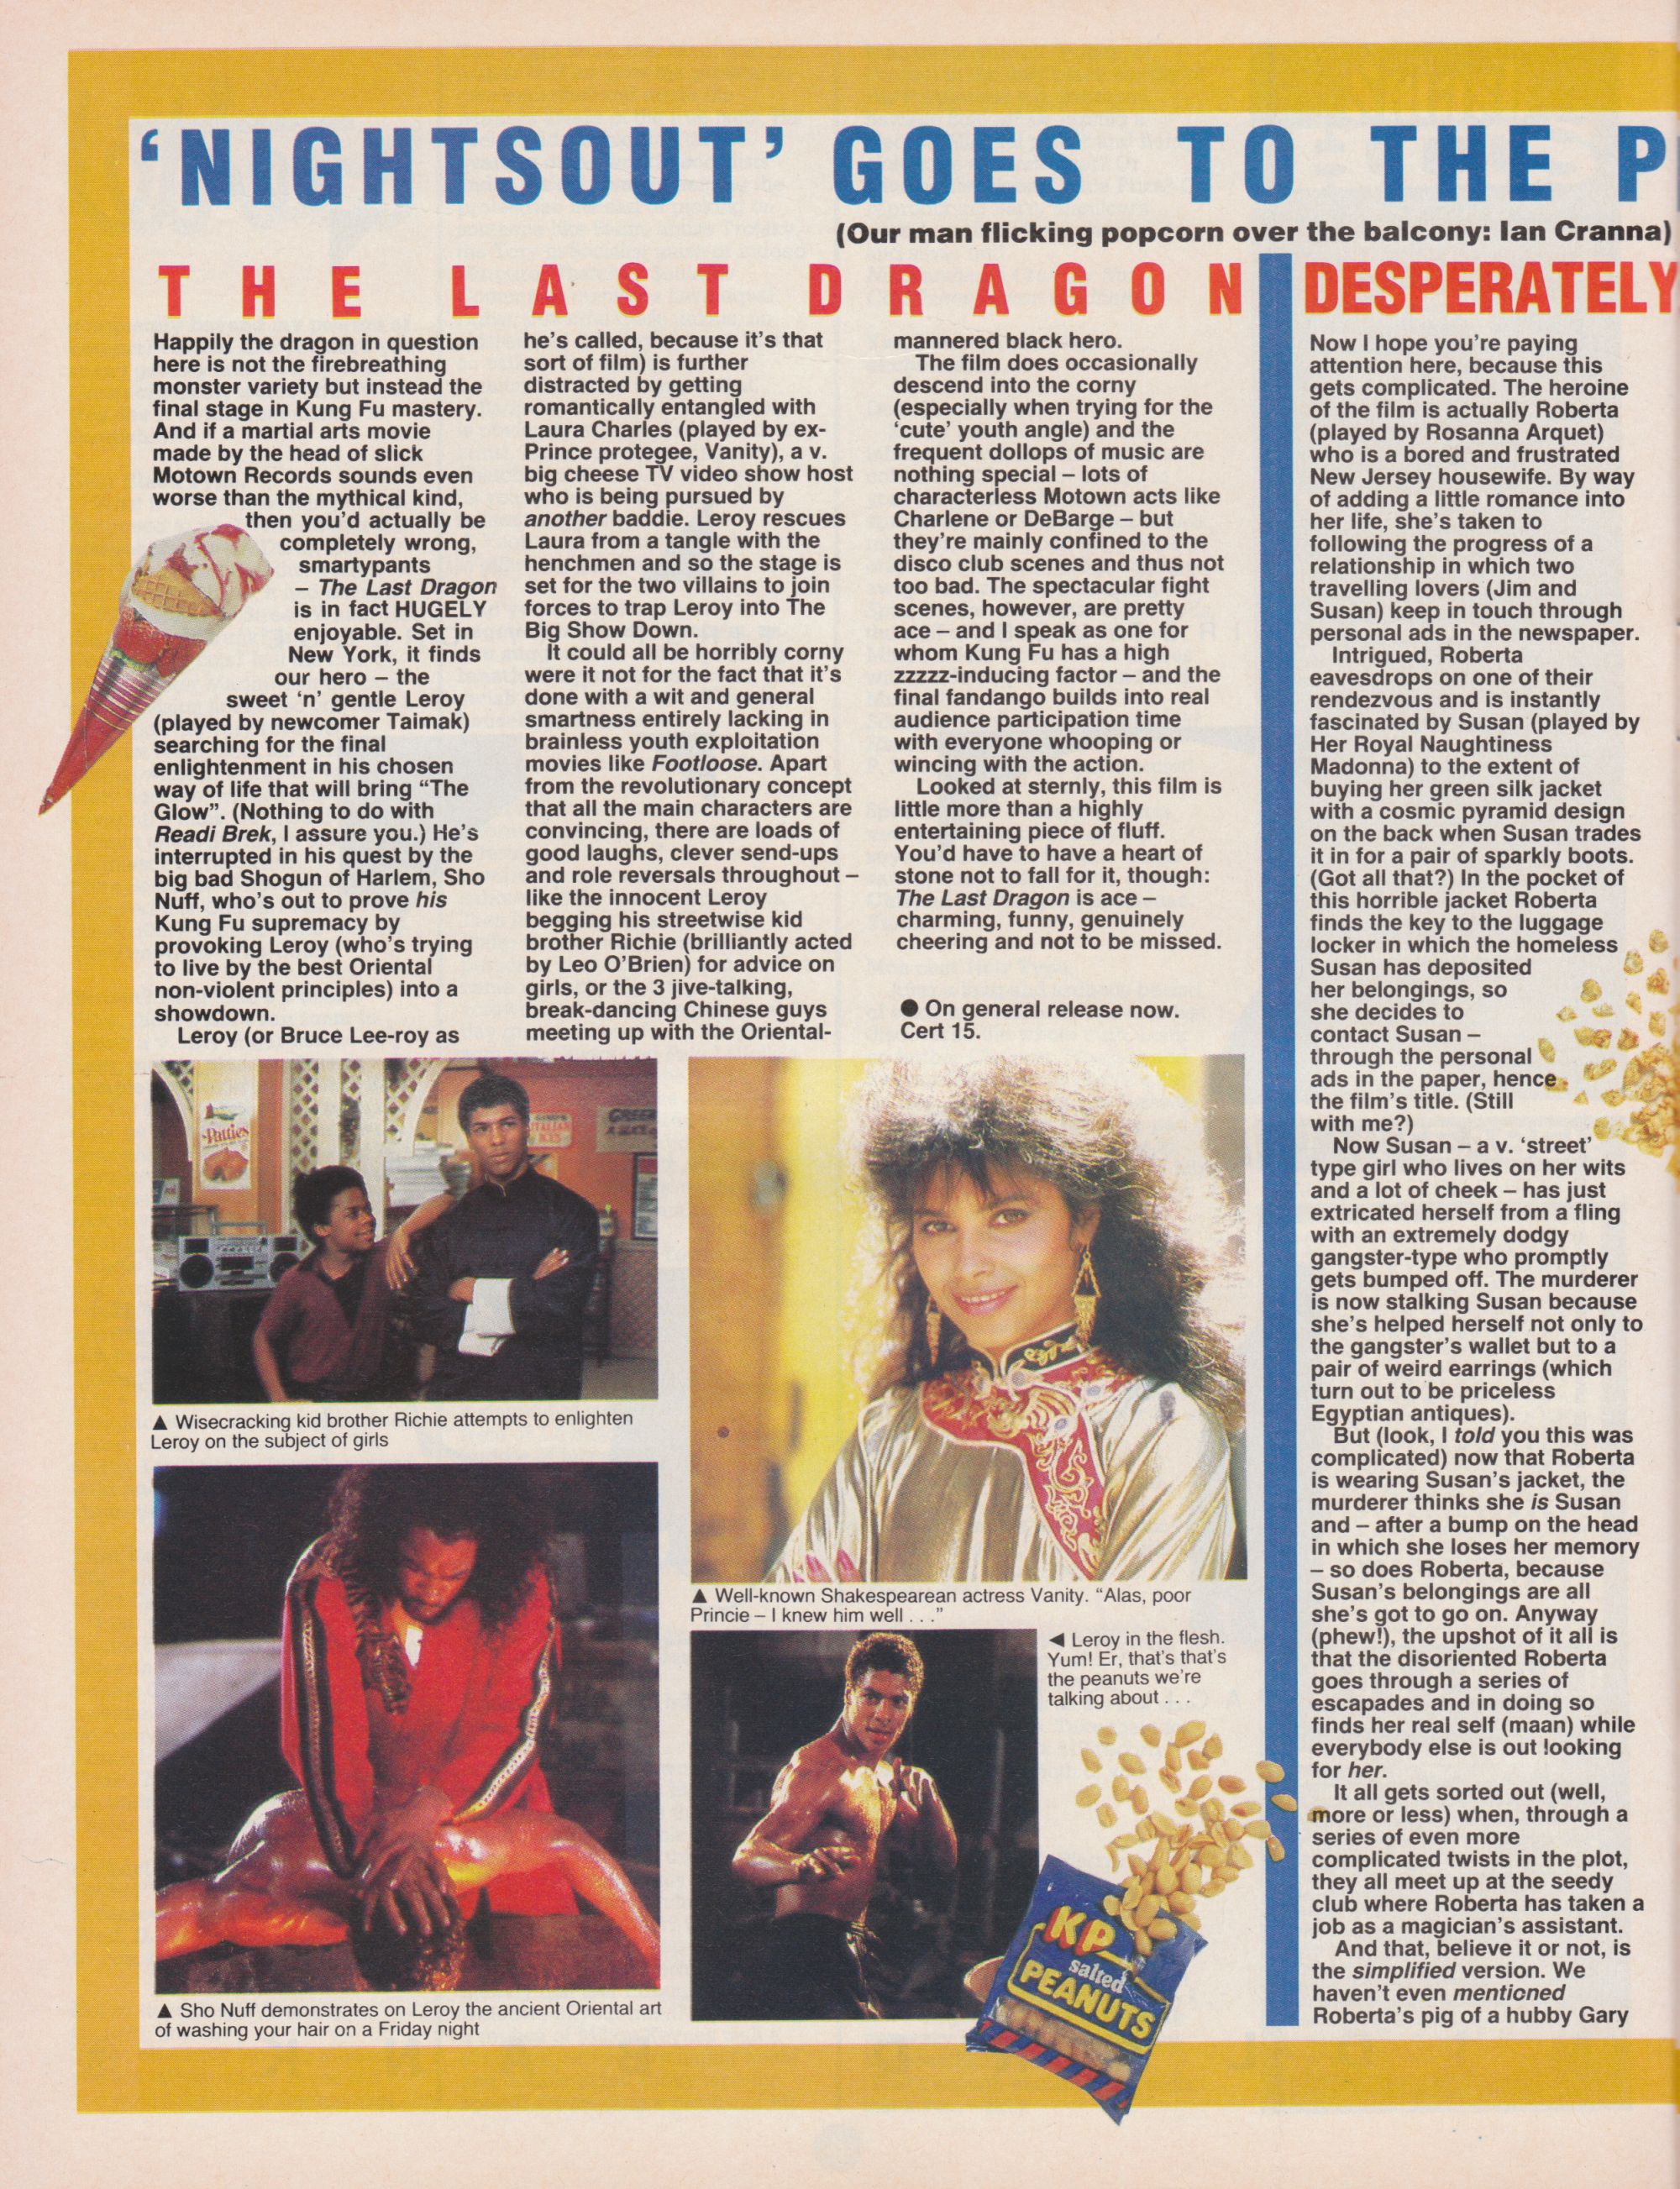 1985-Review-of-The-Last-Dragon-Charming-Funny-Genuinely-cheering-not-to-be-missed.jpg